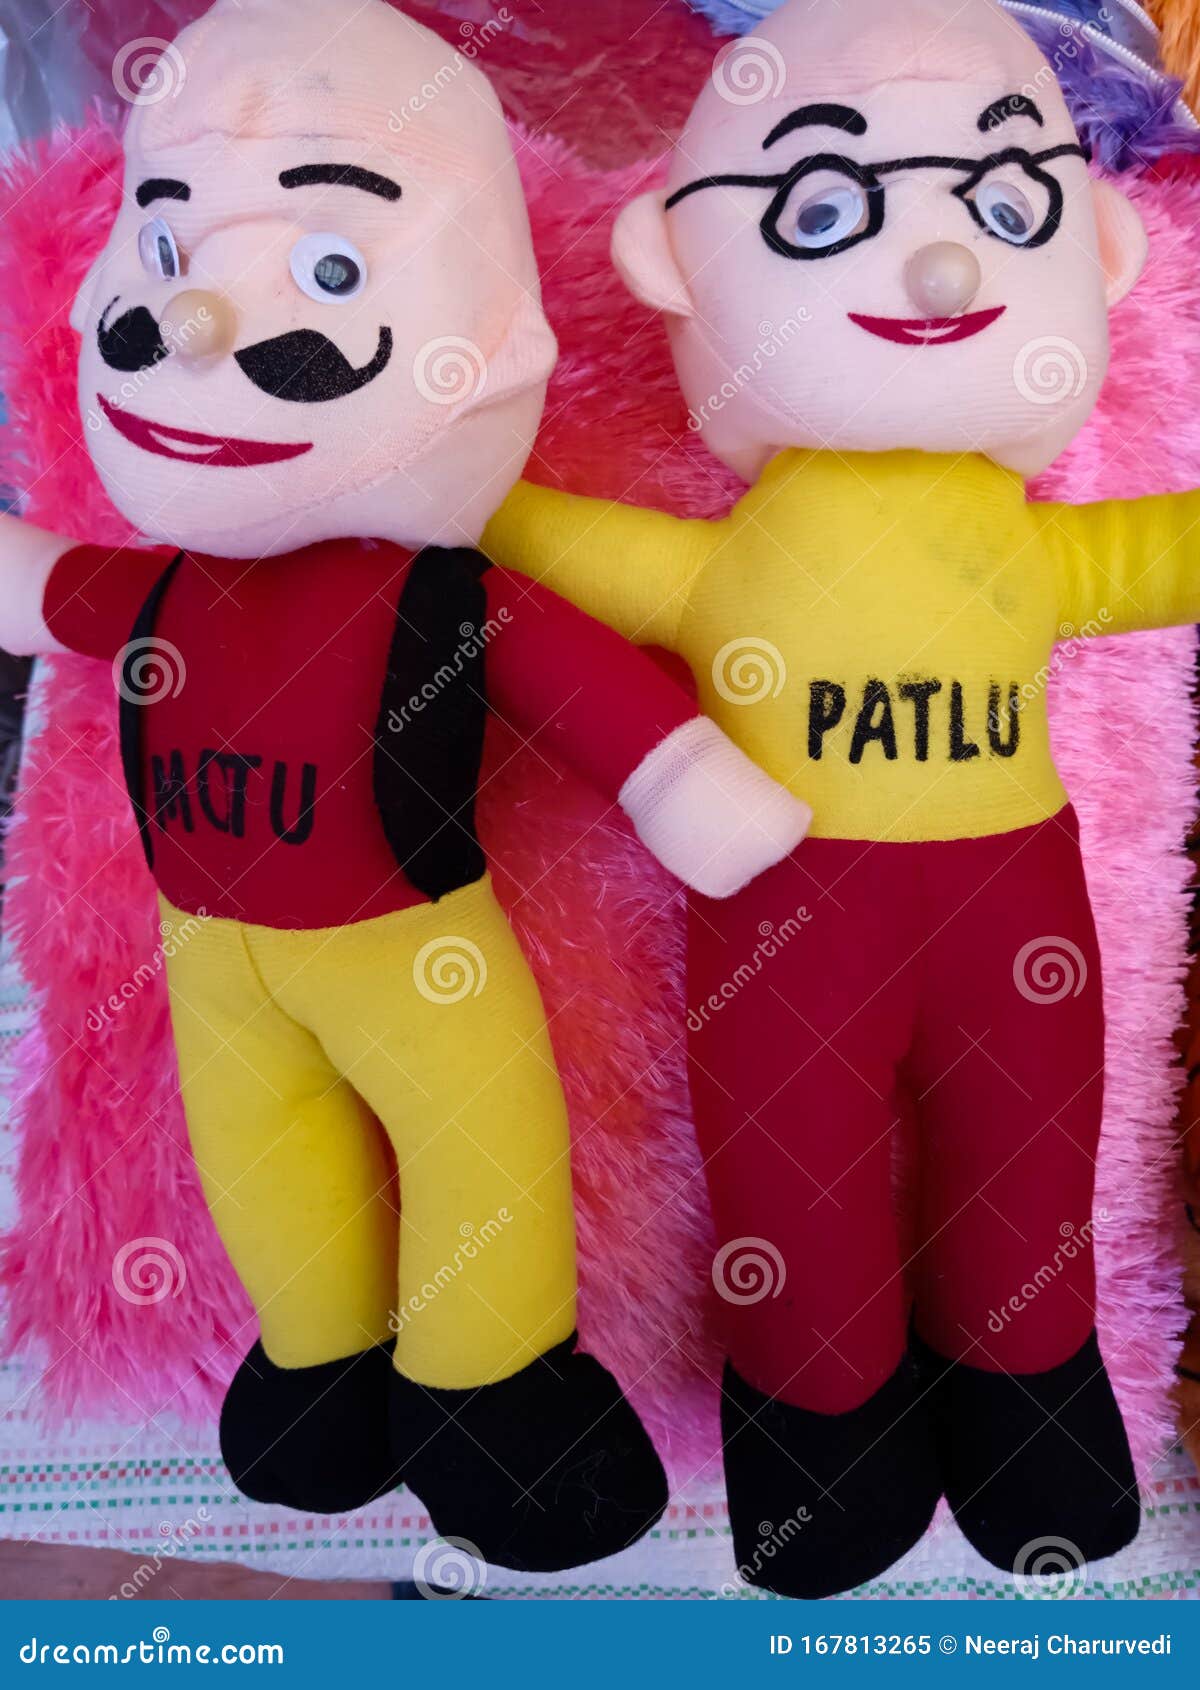 Motu Patlu Indian Cartoon Characters Isolated on Toy Shop in India Dec 2019  Editorial Image - Image of cute, little: 167813265